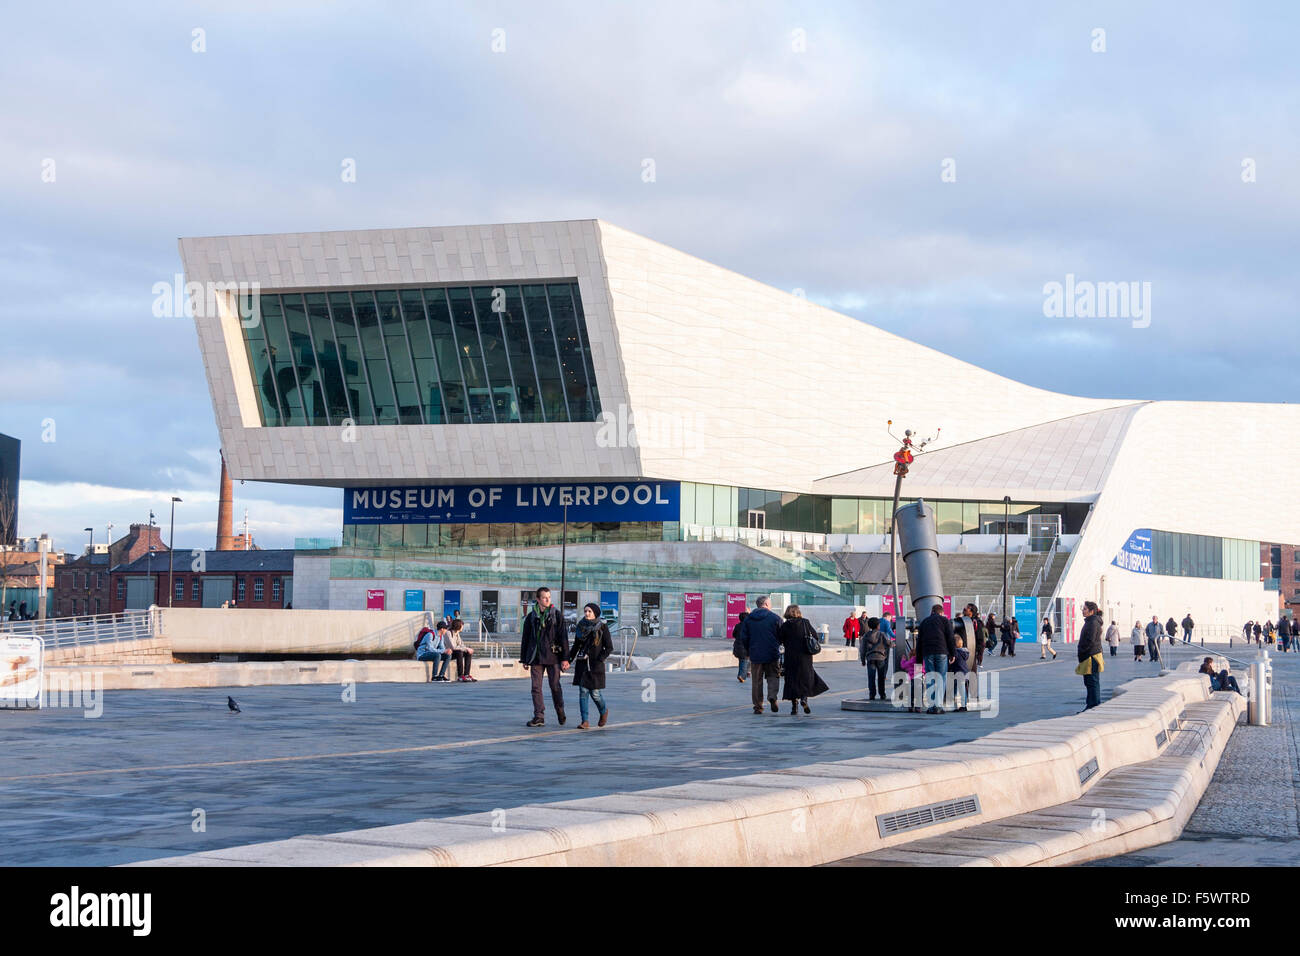 An exterior view of the Museum of Liverpool, Liverpool, Merseyside, UK. Stock Photo